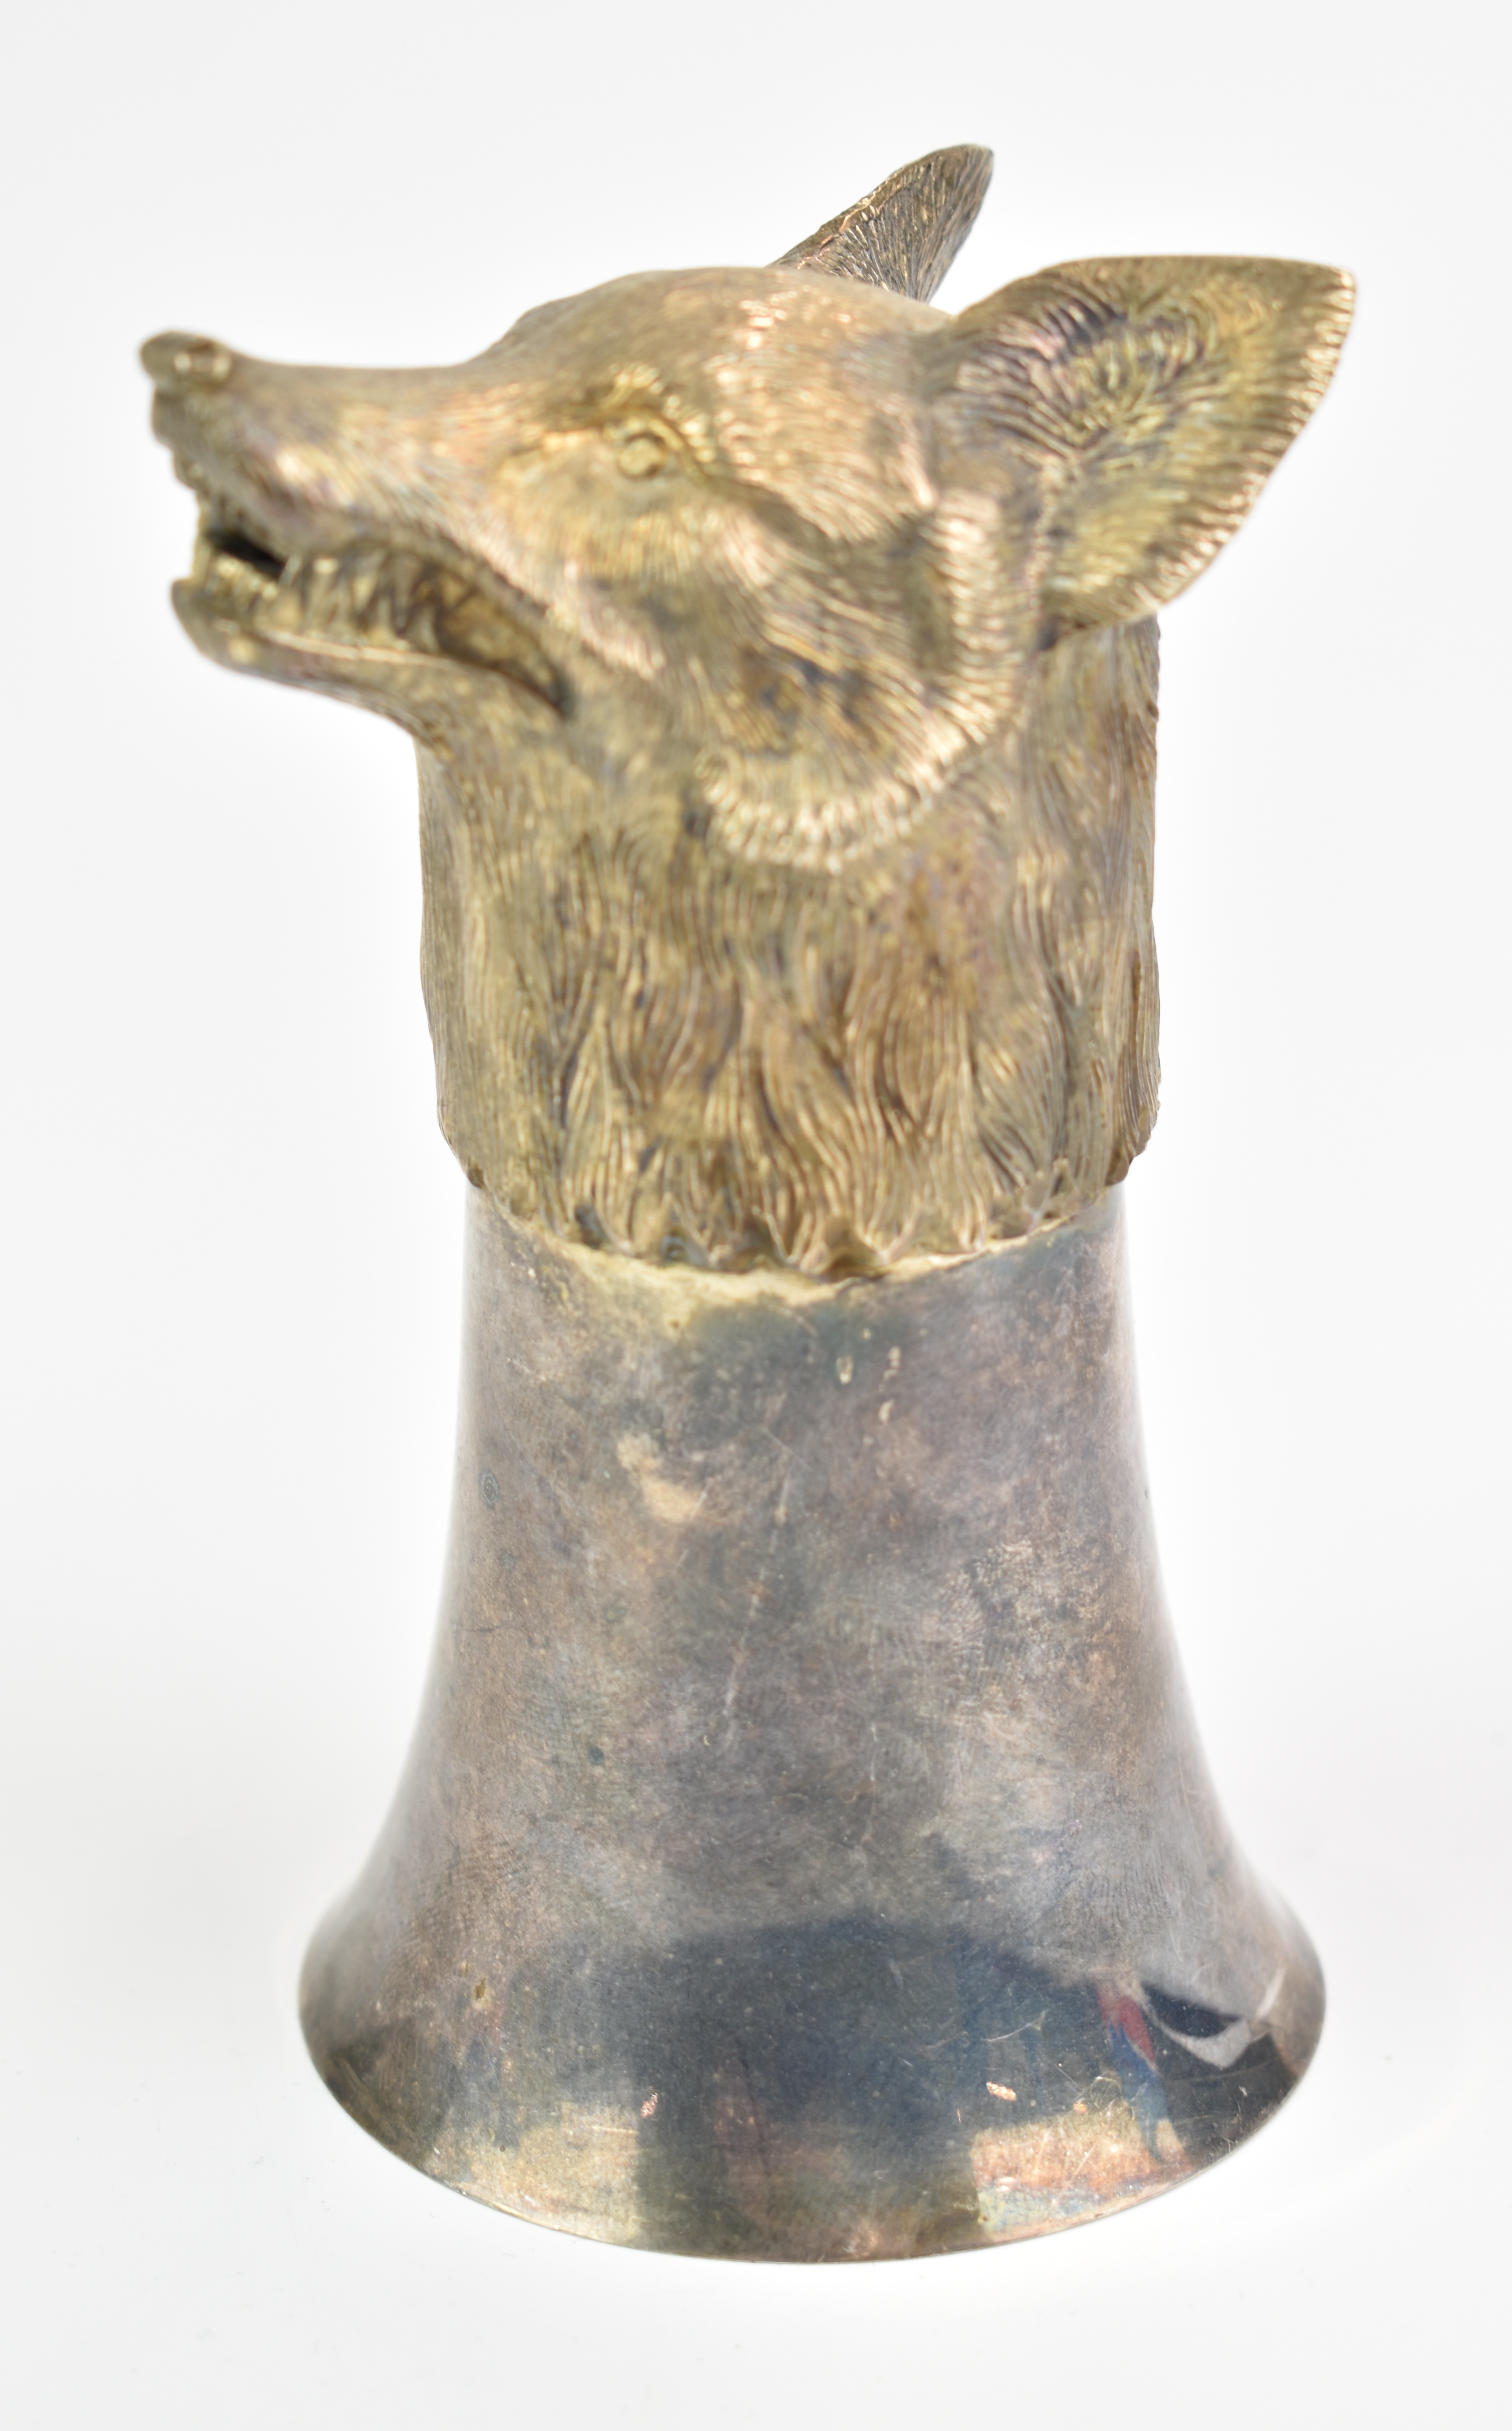 Irish hallmarked silver novelty stirrup cup formed as a fox's head, Dublin 1998, maker Alwright & - Image 2 of 4